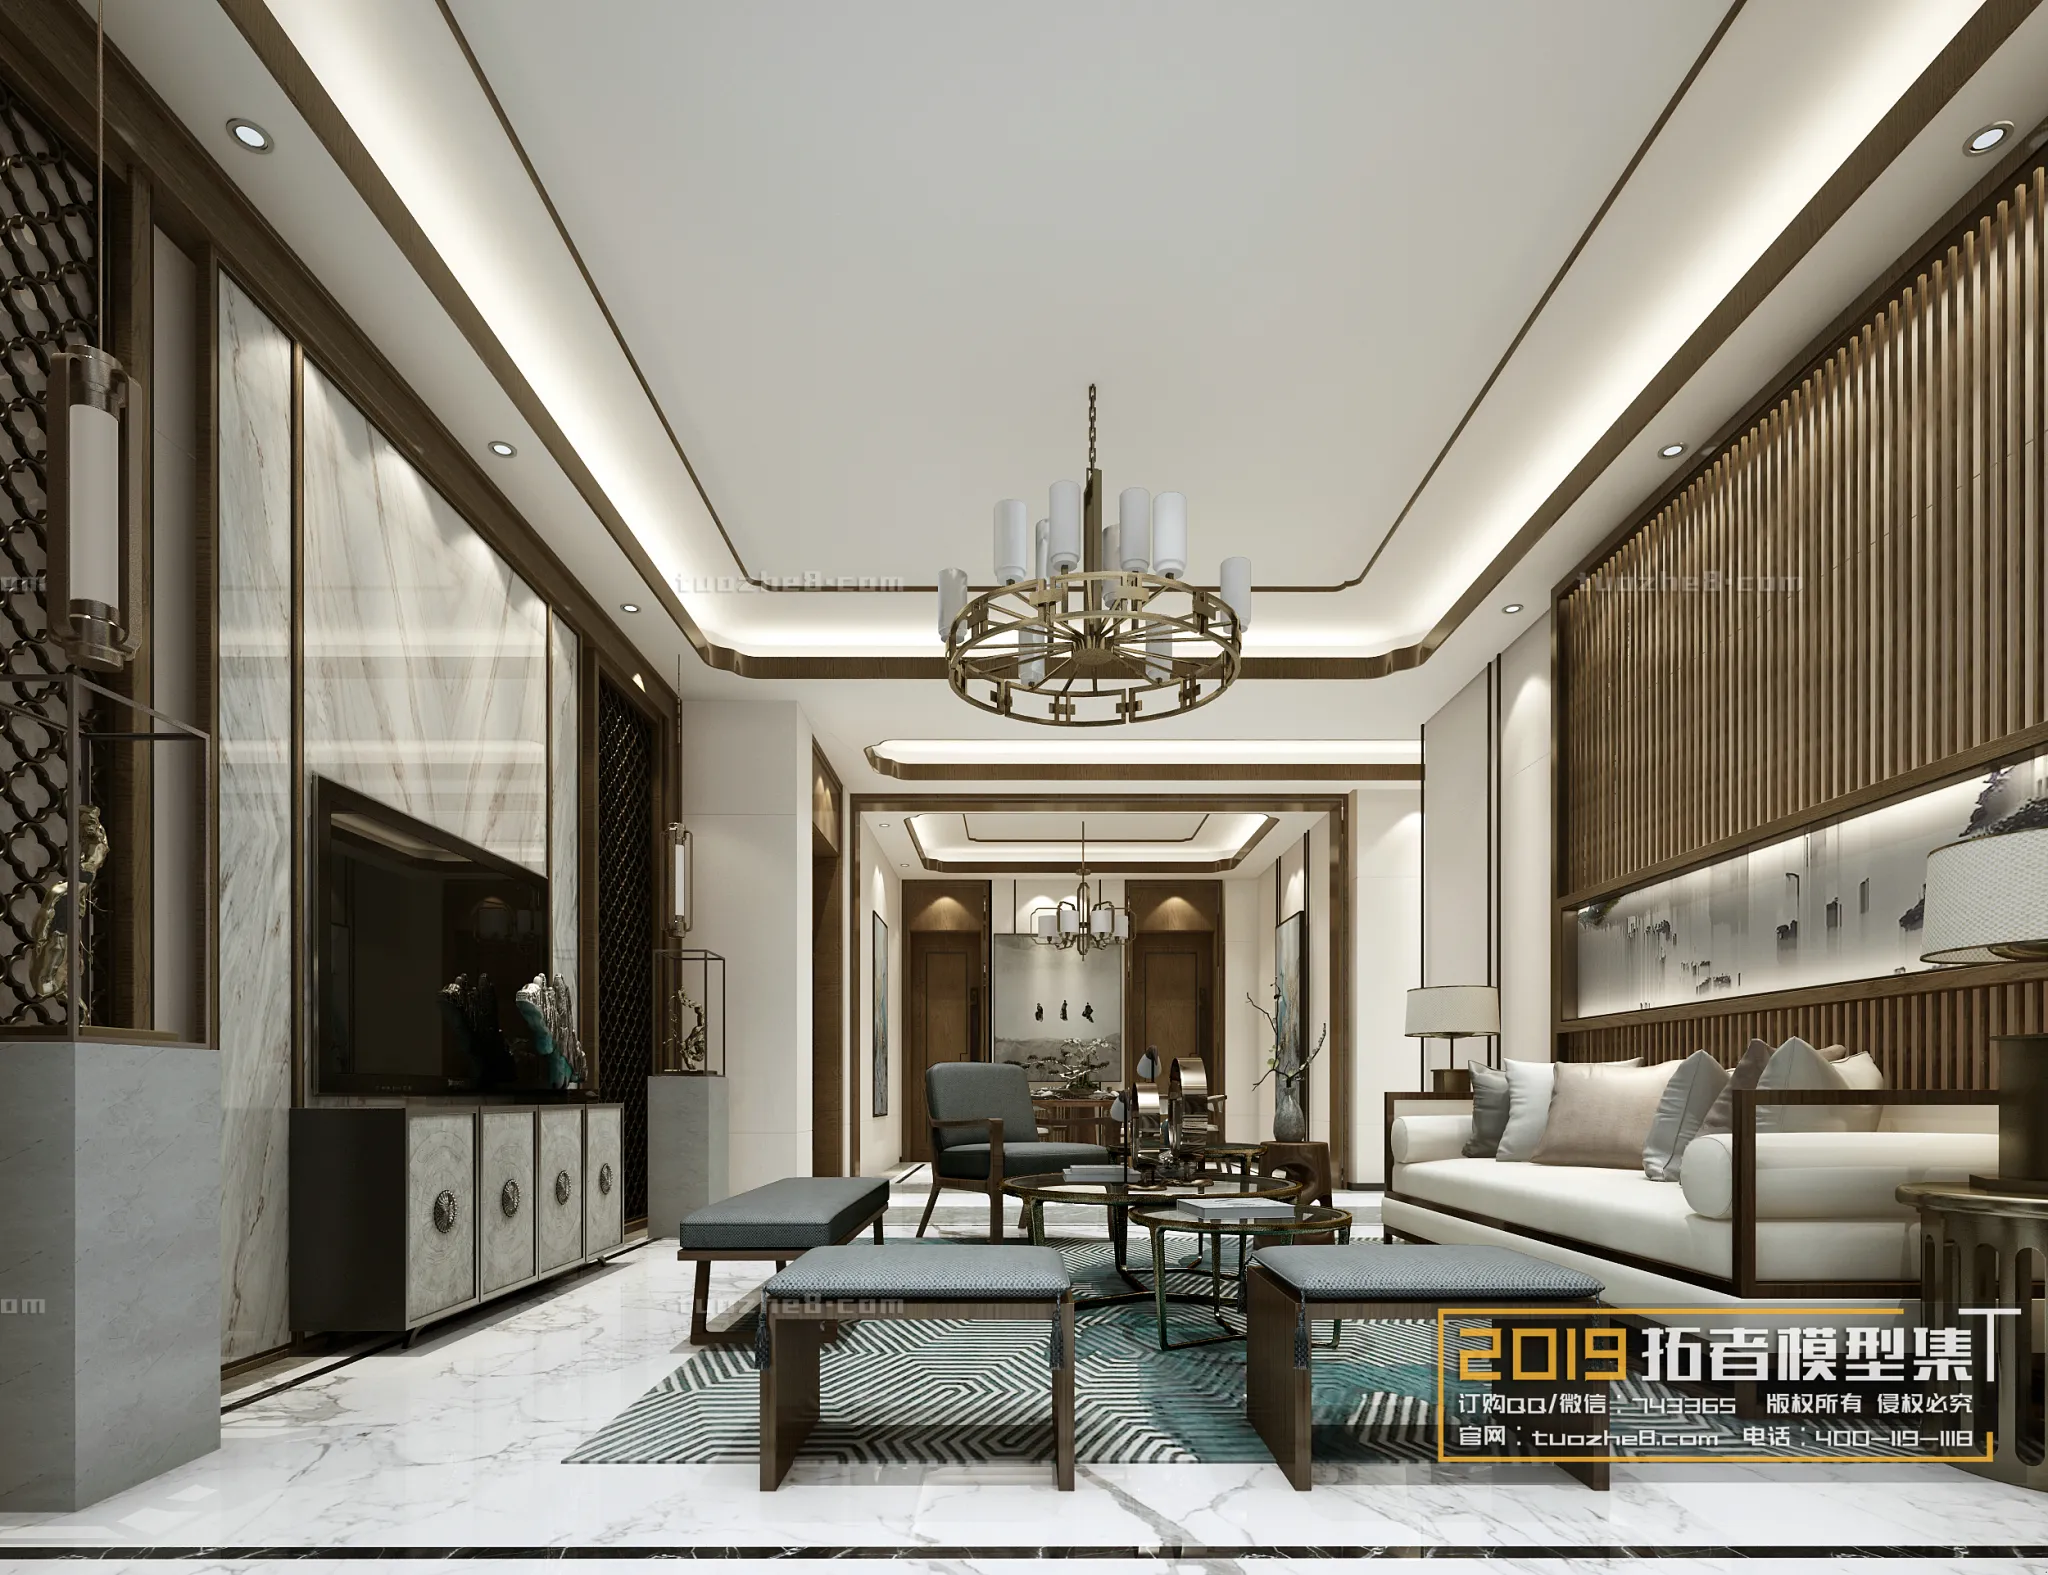 Extension Interior – LINGVING ROOM – CHINESE STYLES – 039